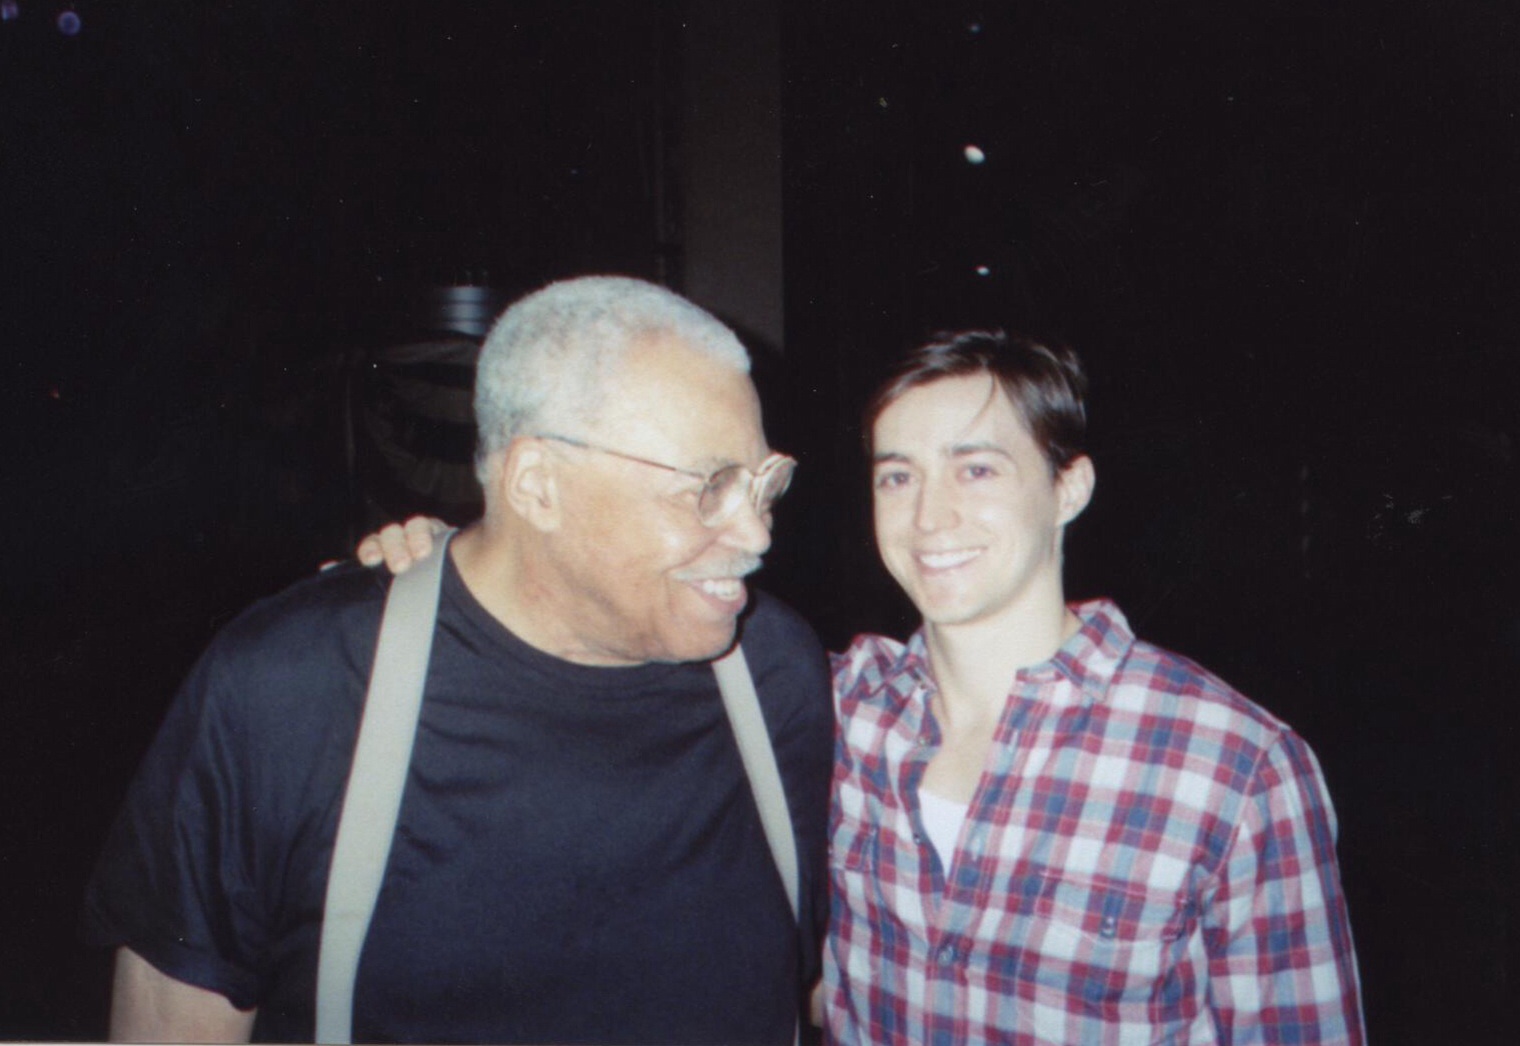 Back stage with James Earl Jones in Gore Vidal's The Best Man on Broadway